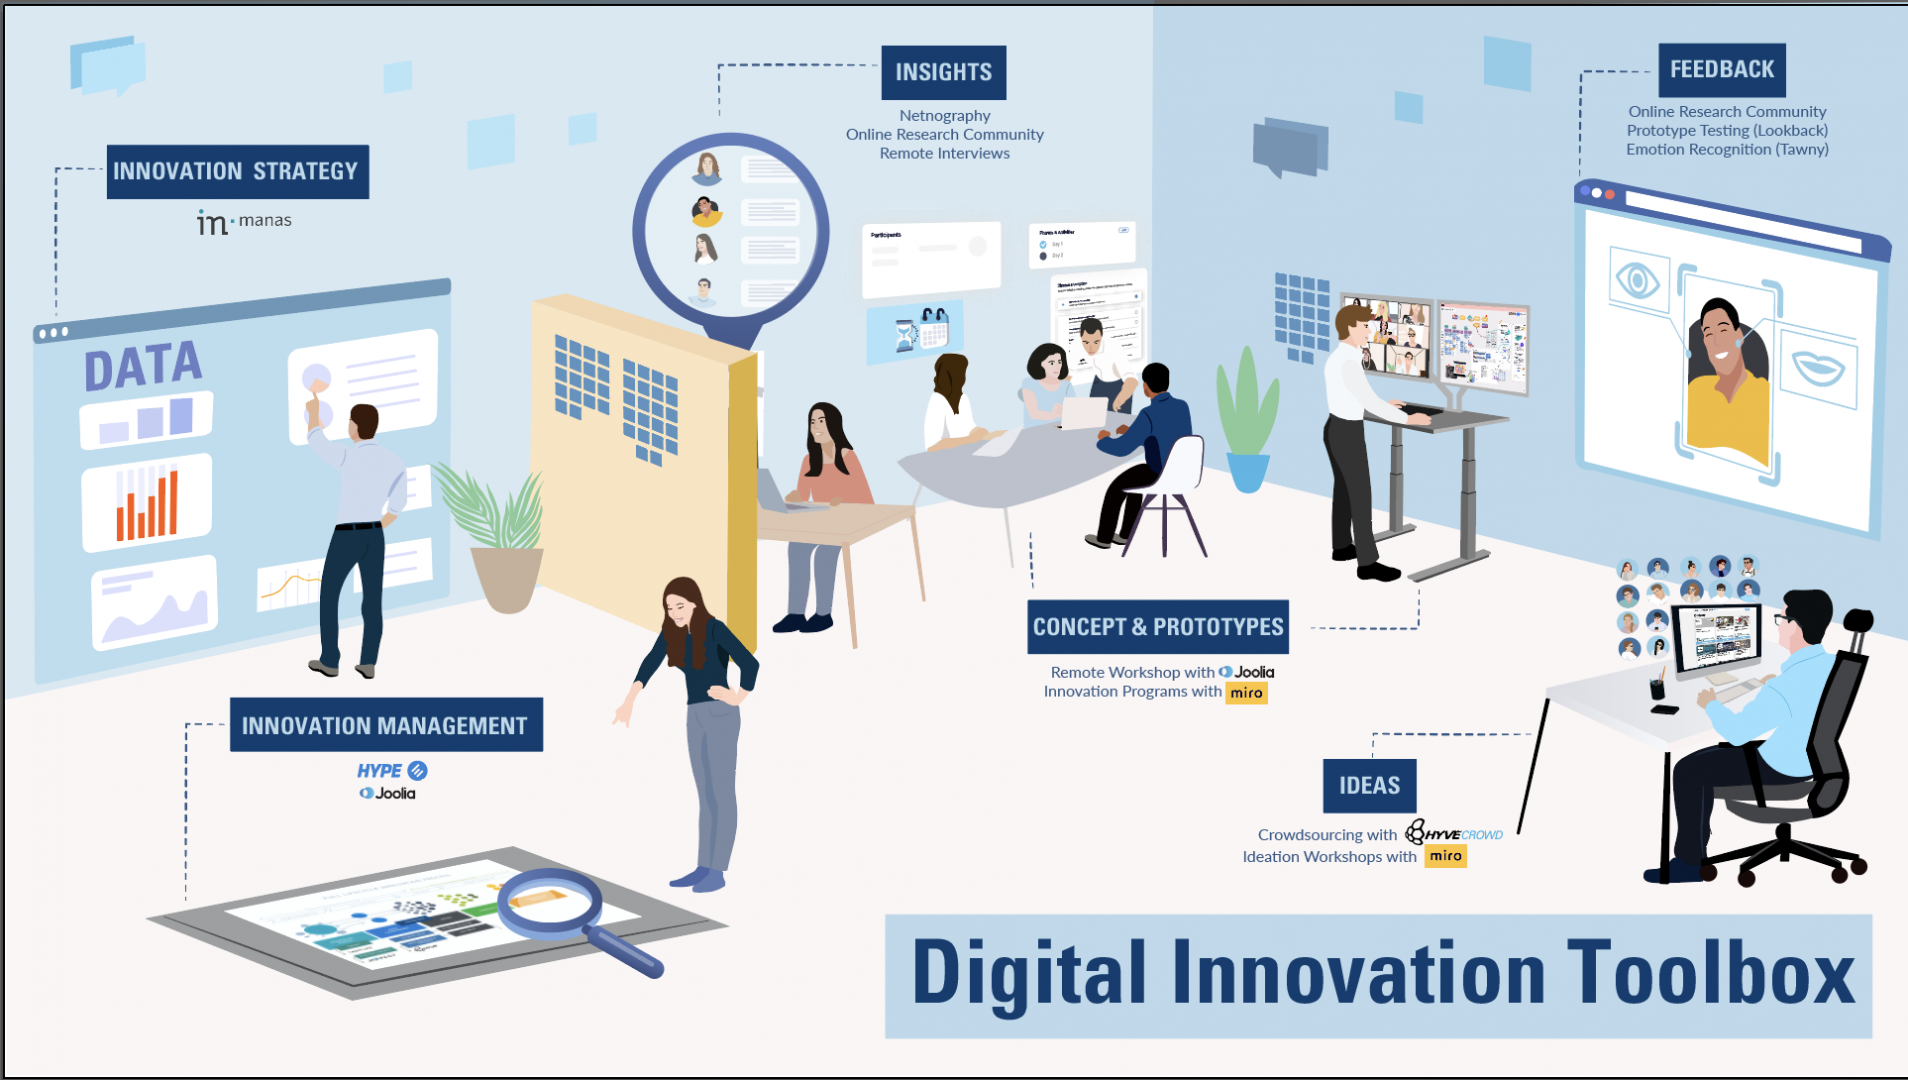 Clipart image of Digital Innovation Toolbox process